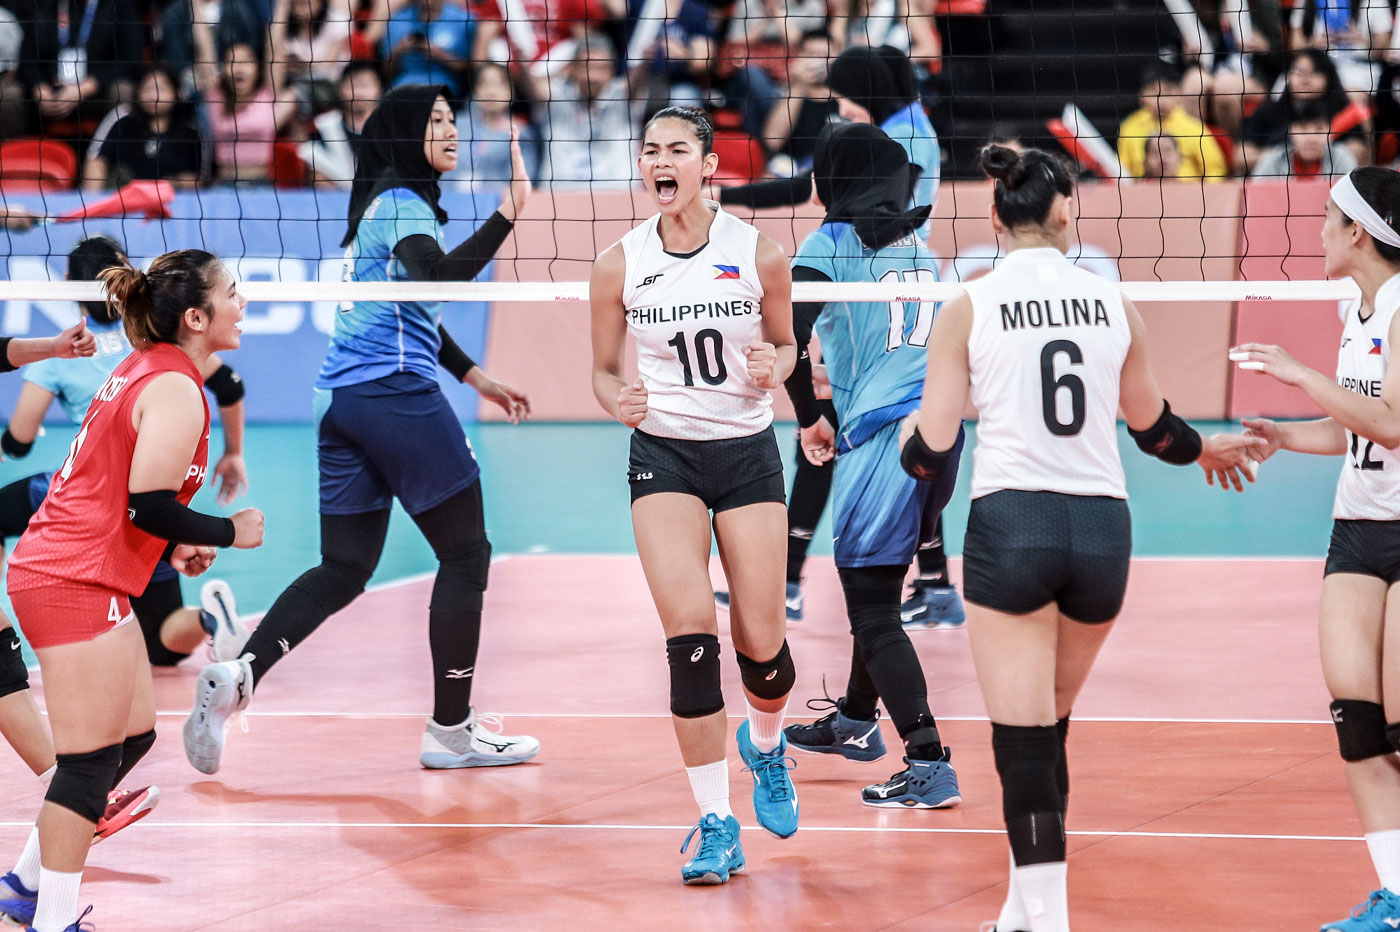 FIGHTING SPIRIT. Filipina spiker Majoy Baron gets all fired up after scoring a point against the Indonesians. Photo by Michael Gatpandan/Rappler  